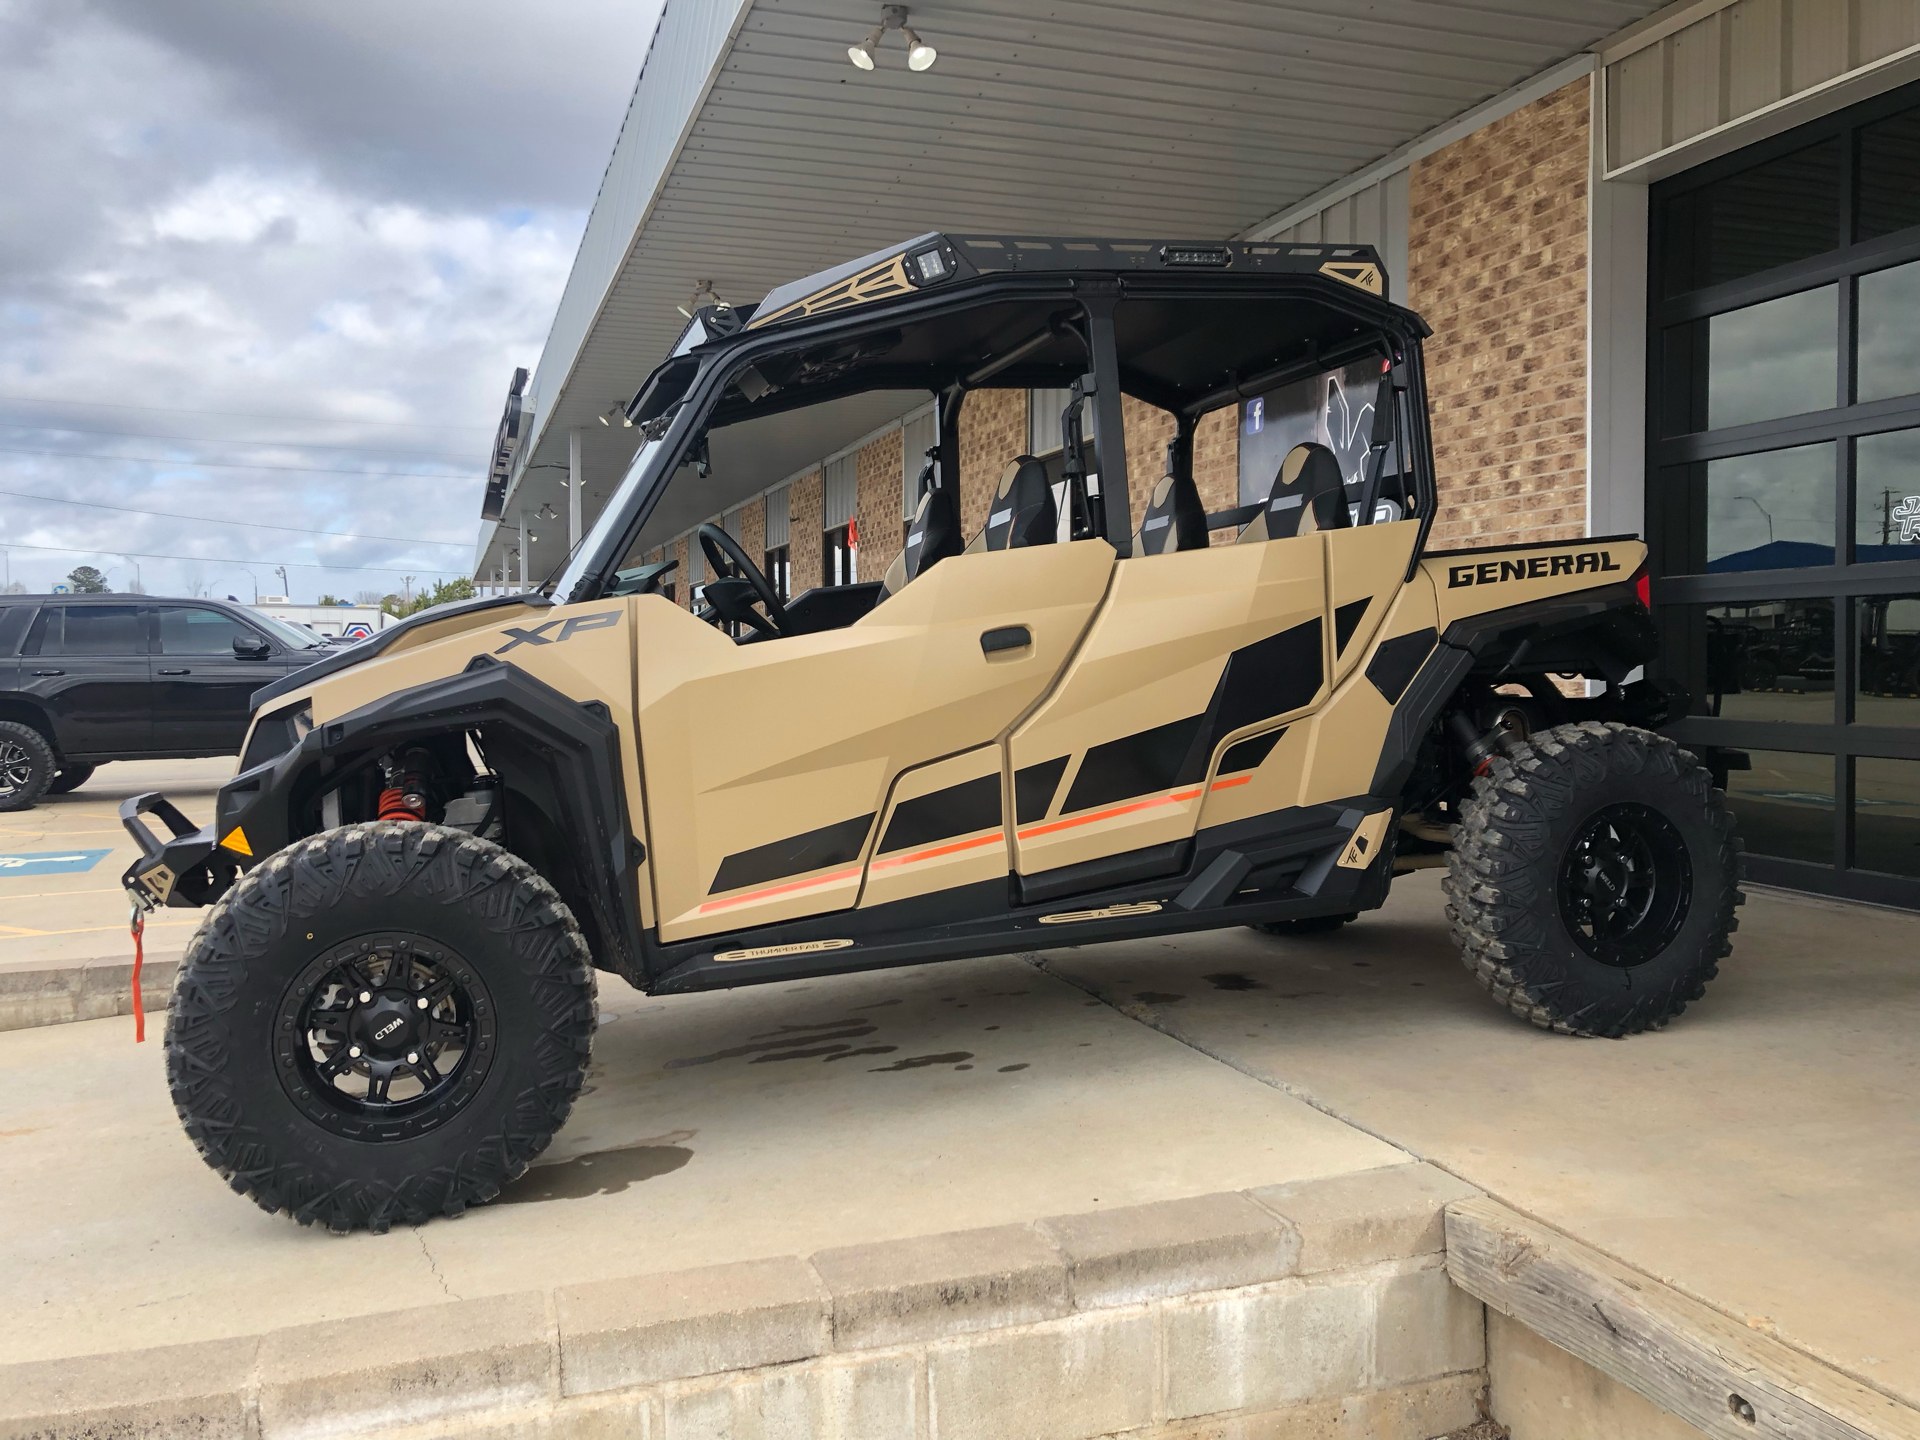 2021 Polaris General XP 4 1000 Deluxe Ride Command in Marshall, Texas - Photo 2